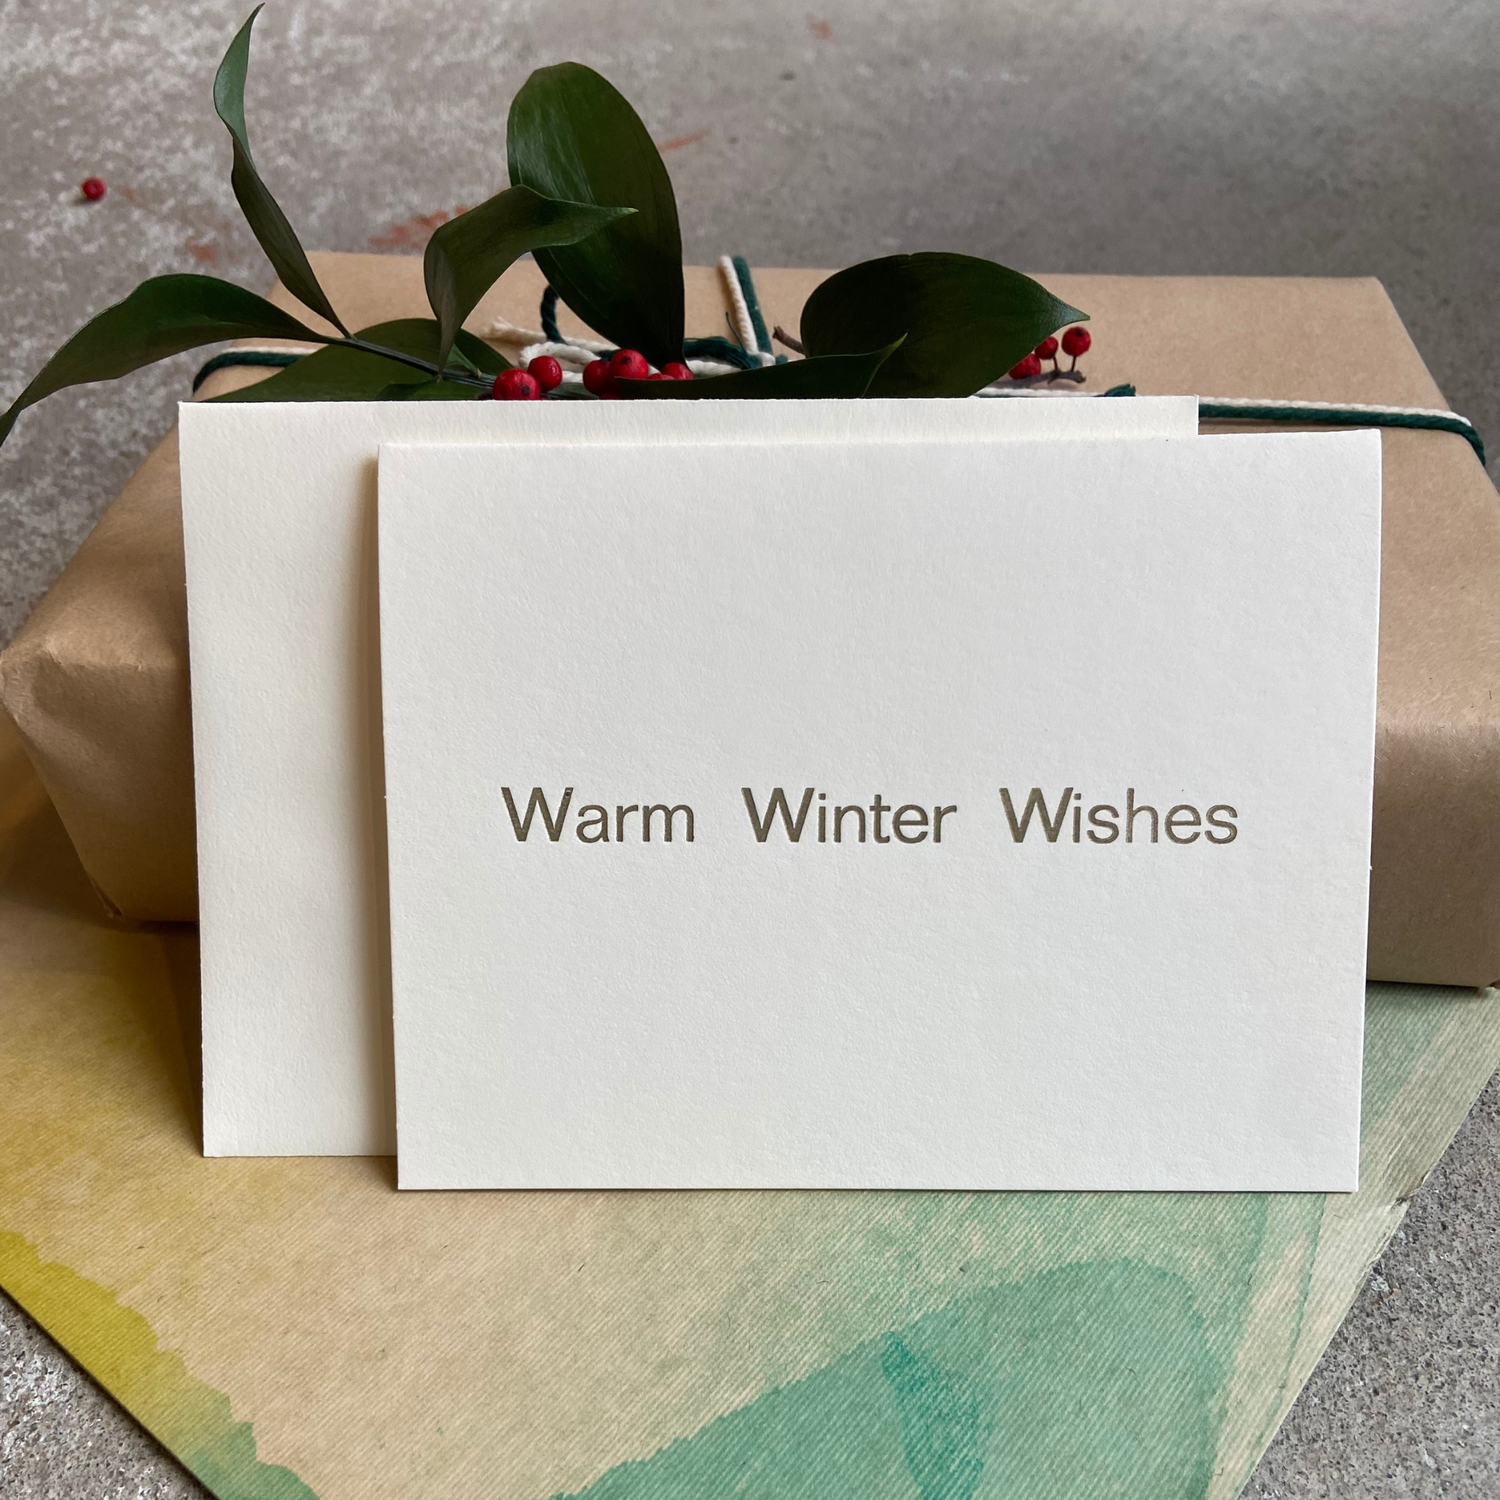 Warm Winter Wishes holiday card